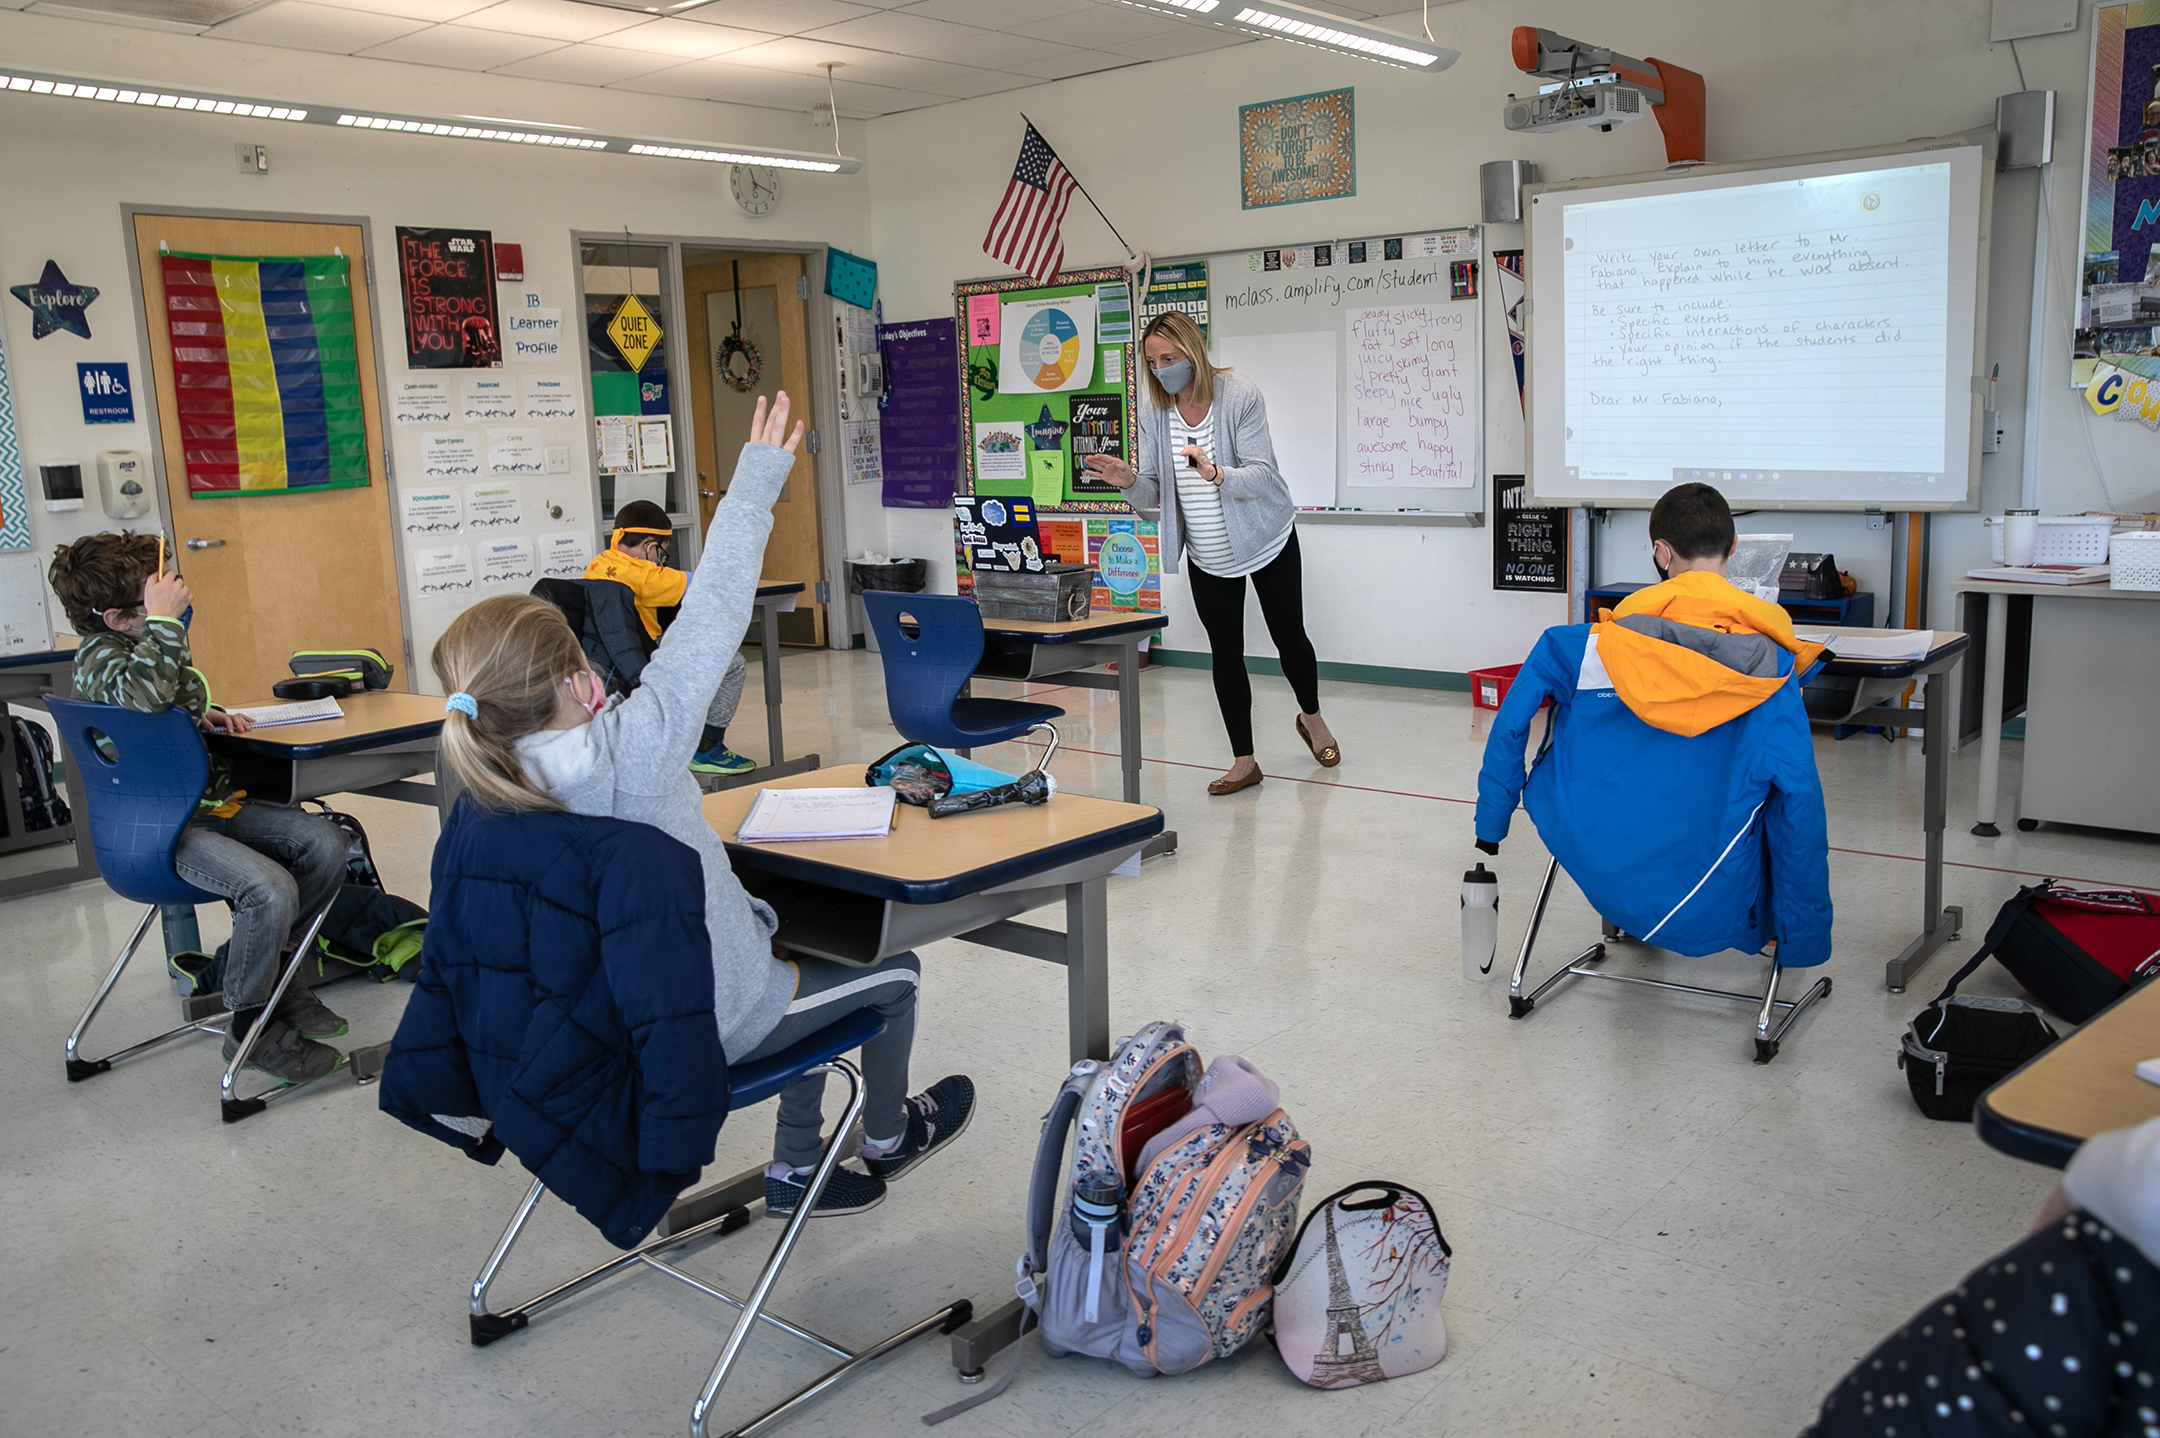 A teacher wearing a mask stands in front of a laptop in a classroom with four students, one with their hand raised